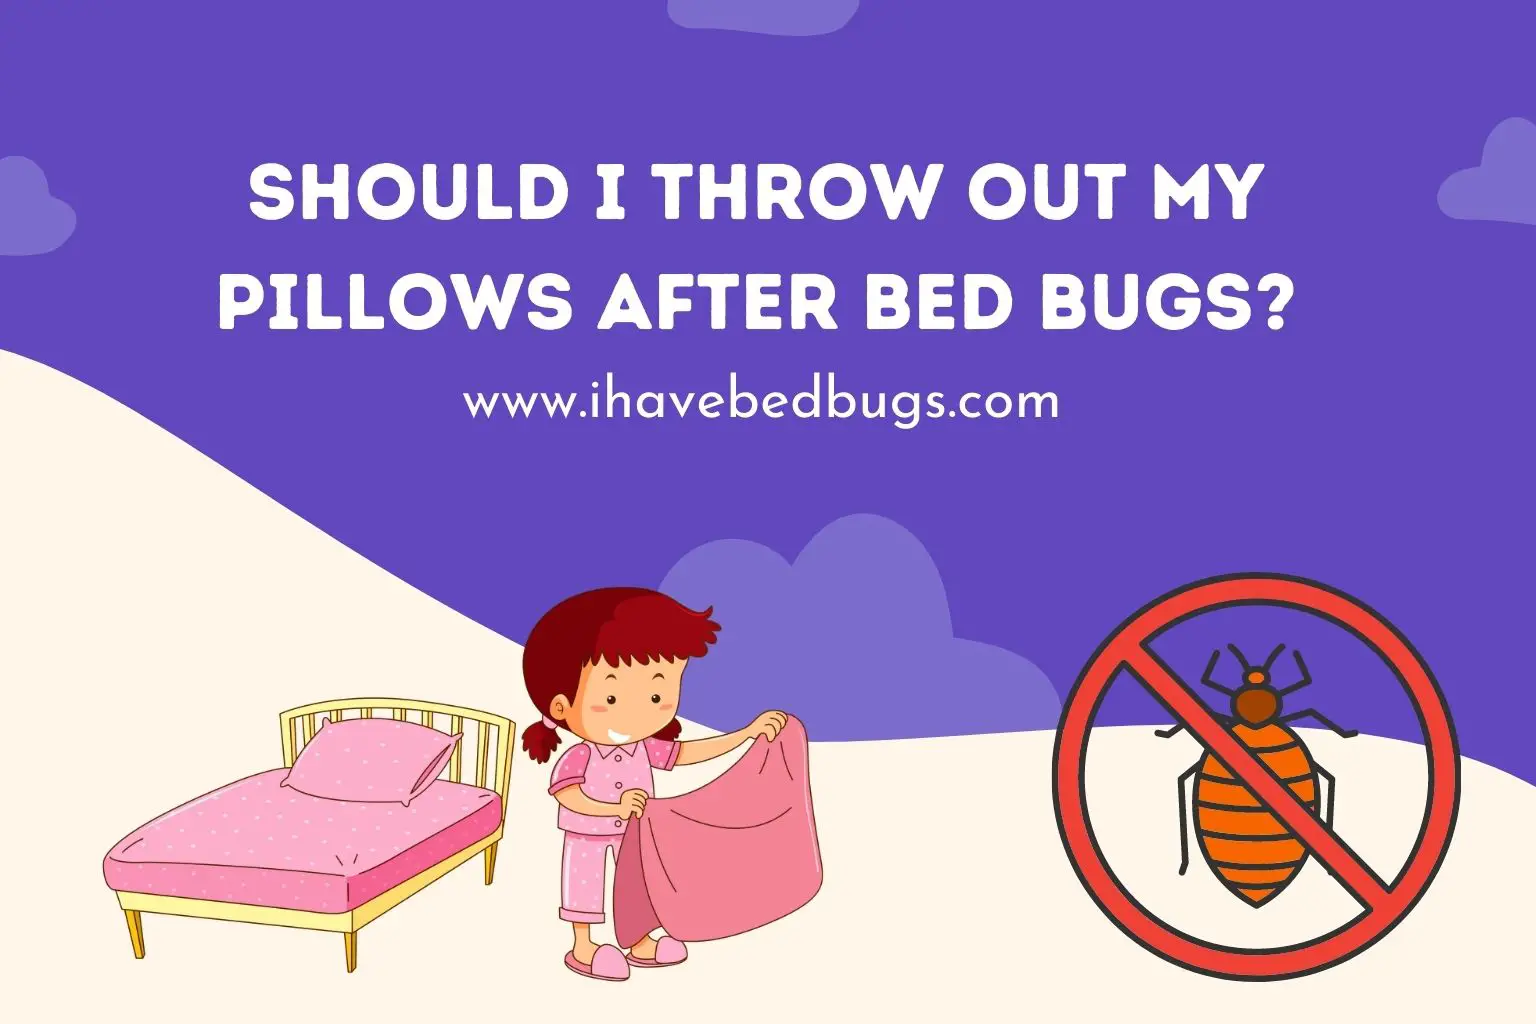 Should I throw out my pillows after bed bugs